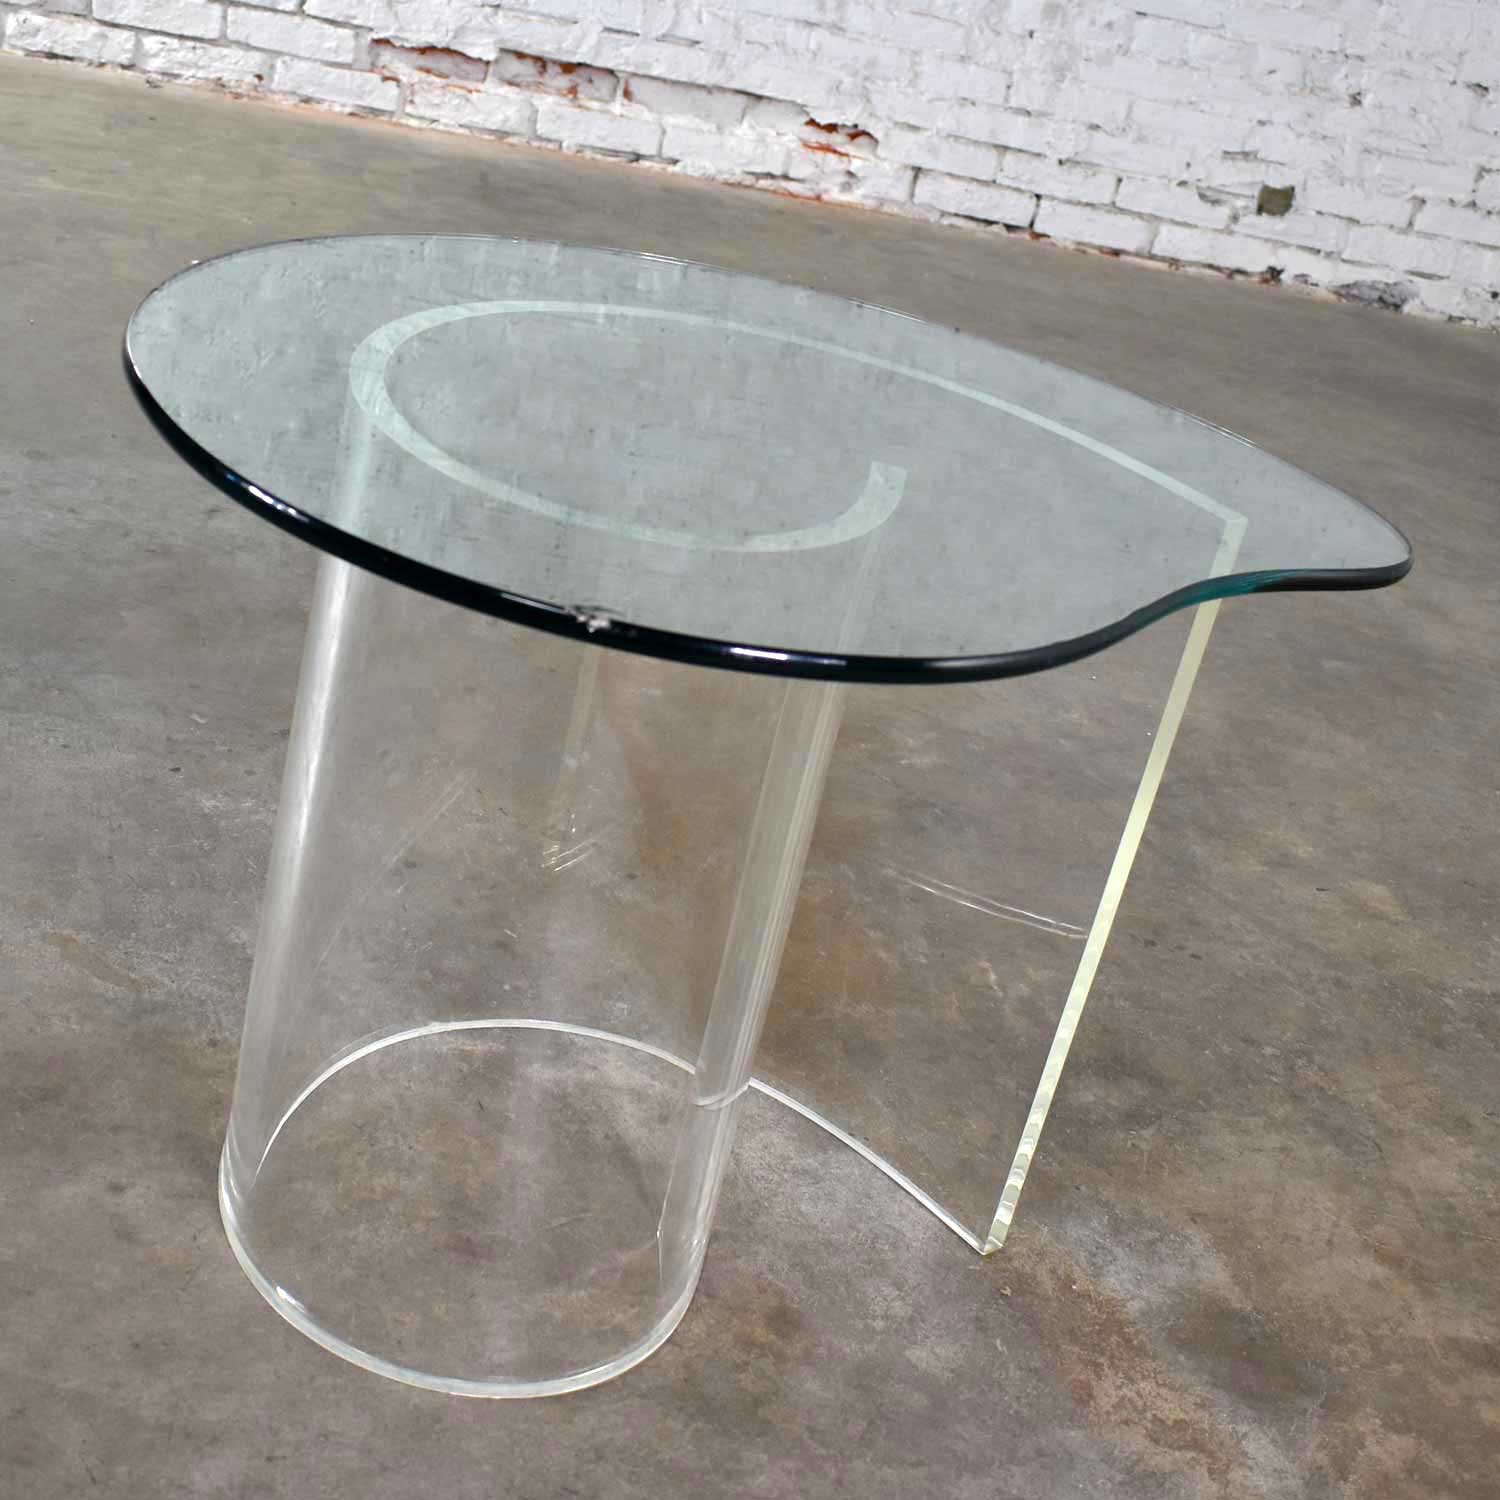 Vintage Hollywood Regency Lucite Snail or Spiral End Table with Kidney Shaped Glass Top